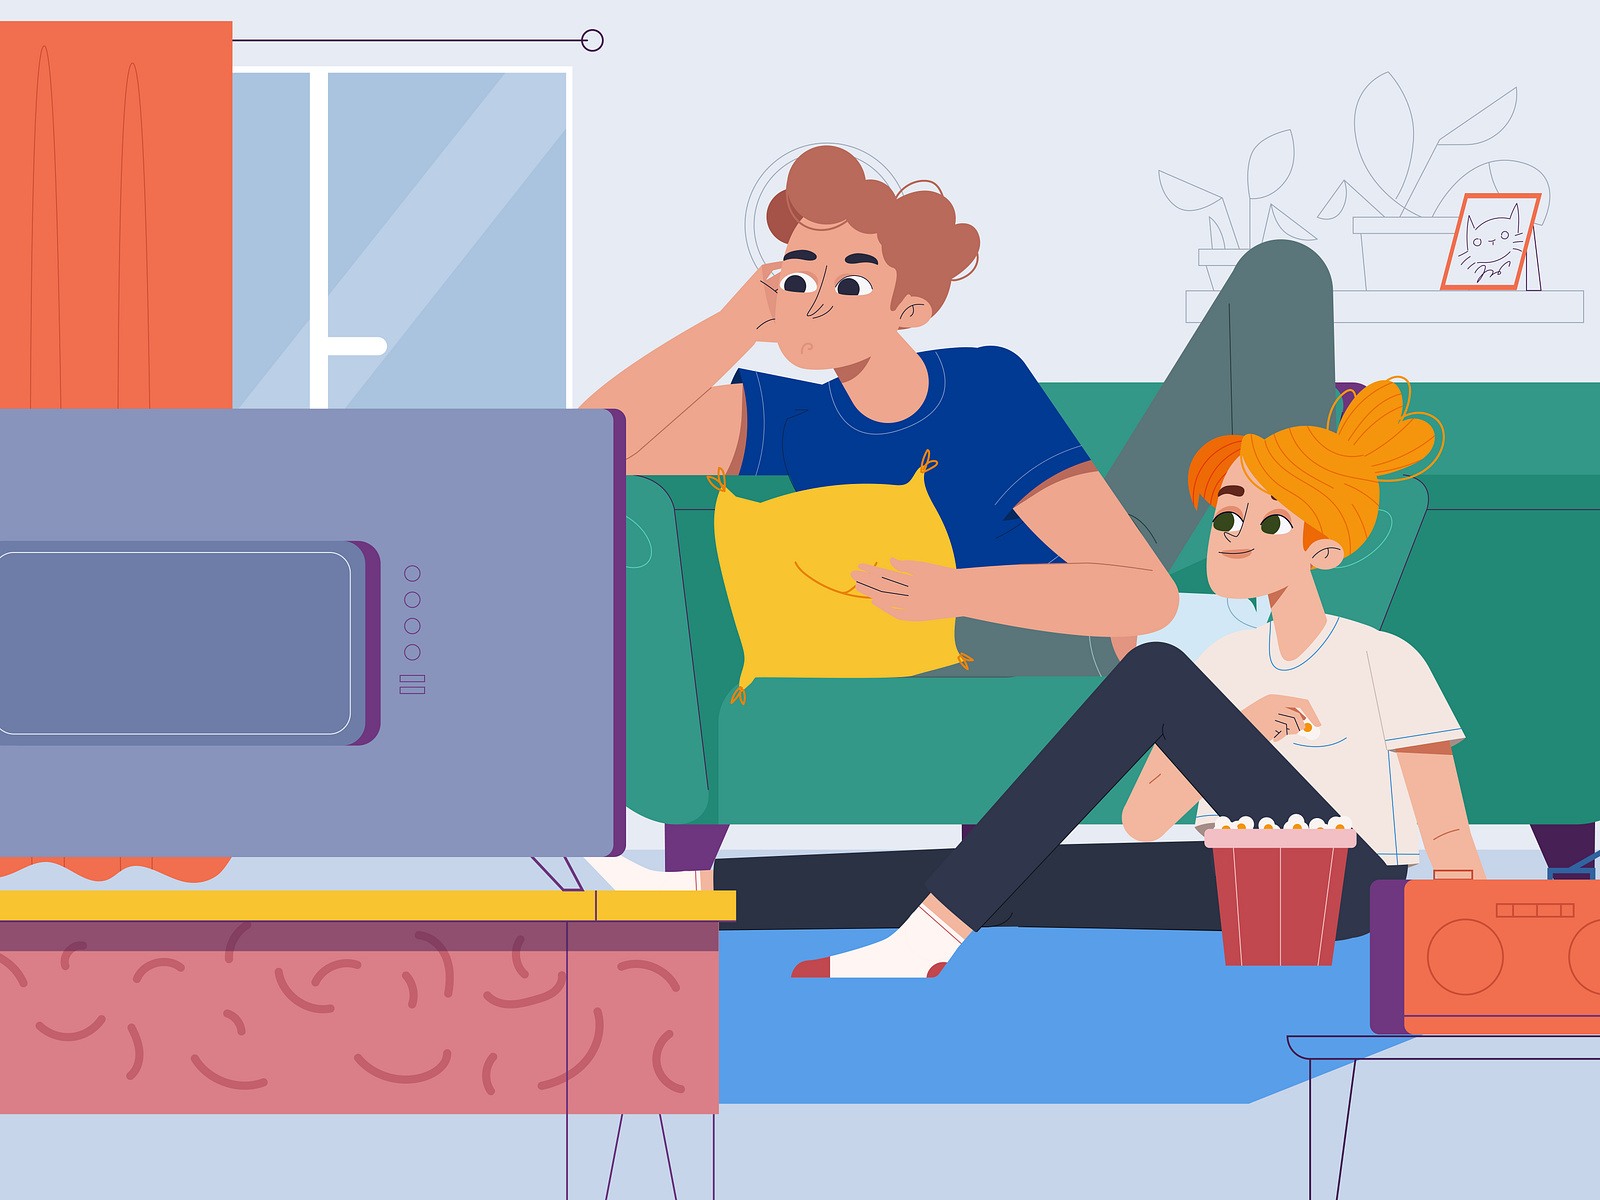 watch movies together by Nicoleta Morari on Dribbble